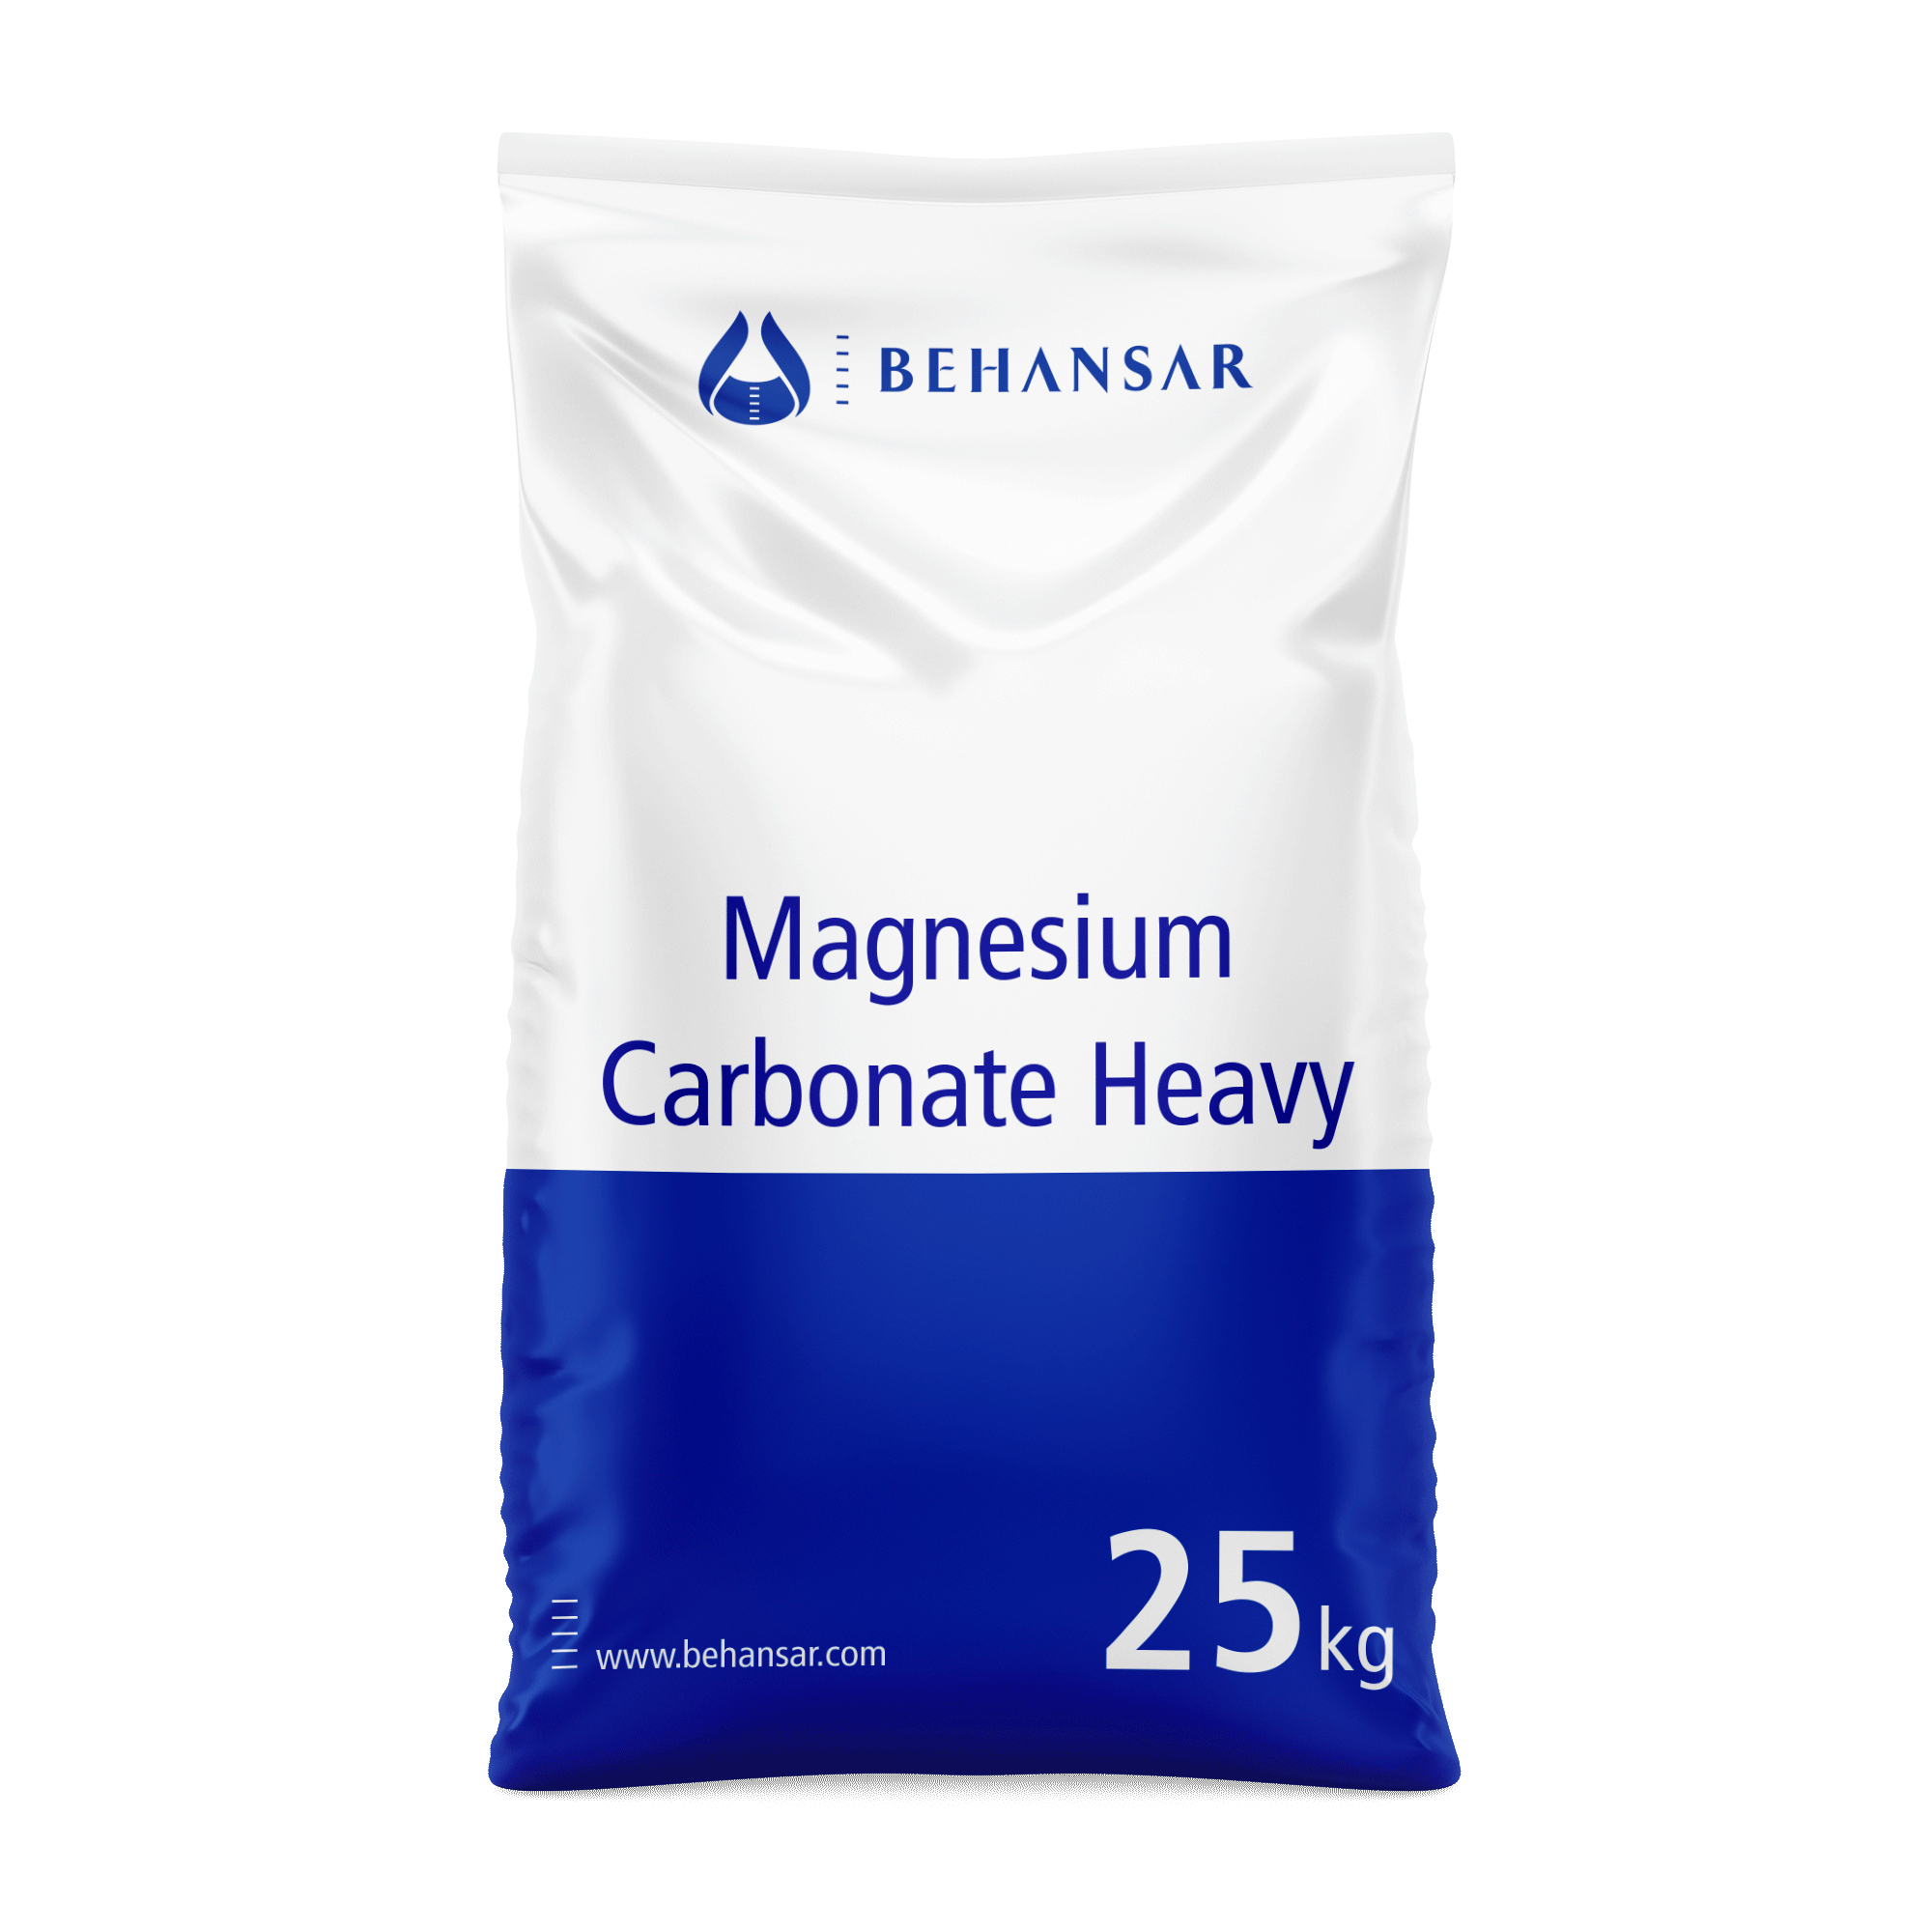 Magnesium Carbonate Heavy is one of the products of Behansar Co